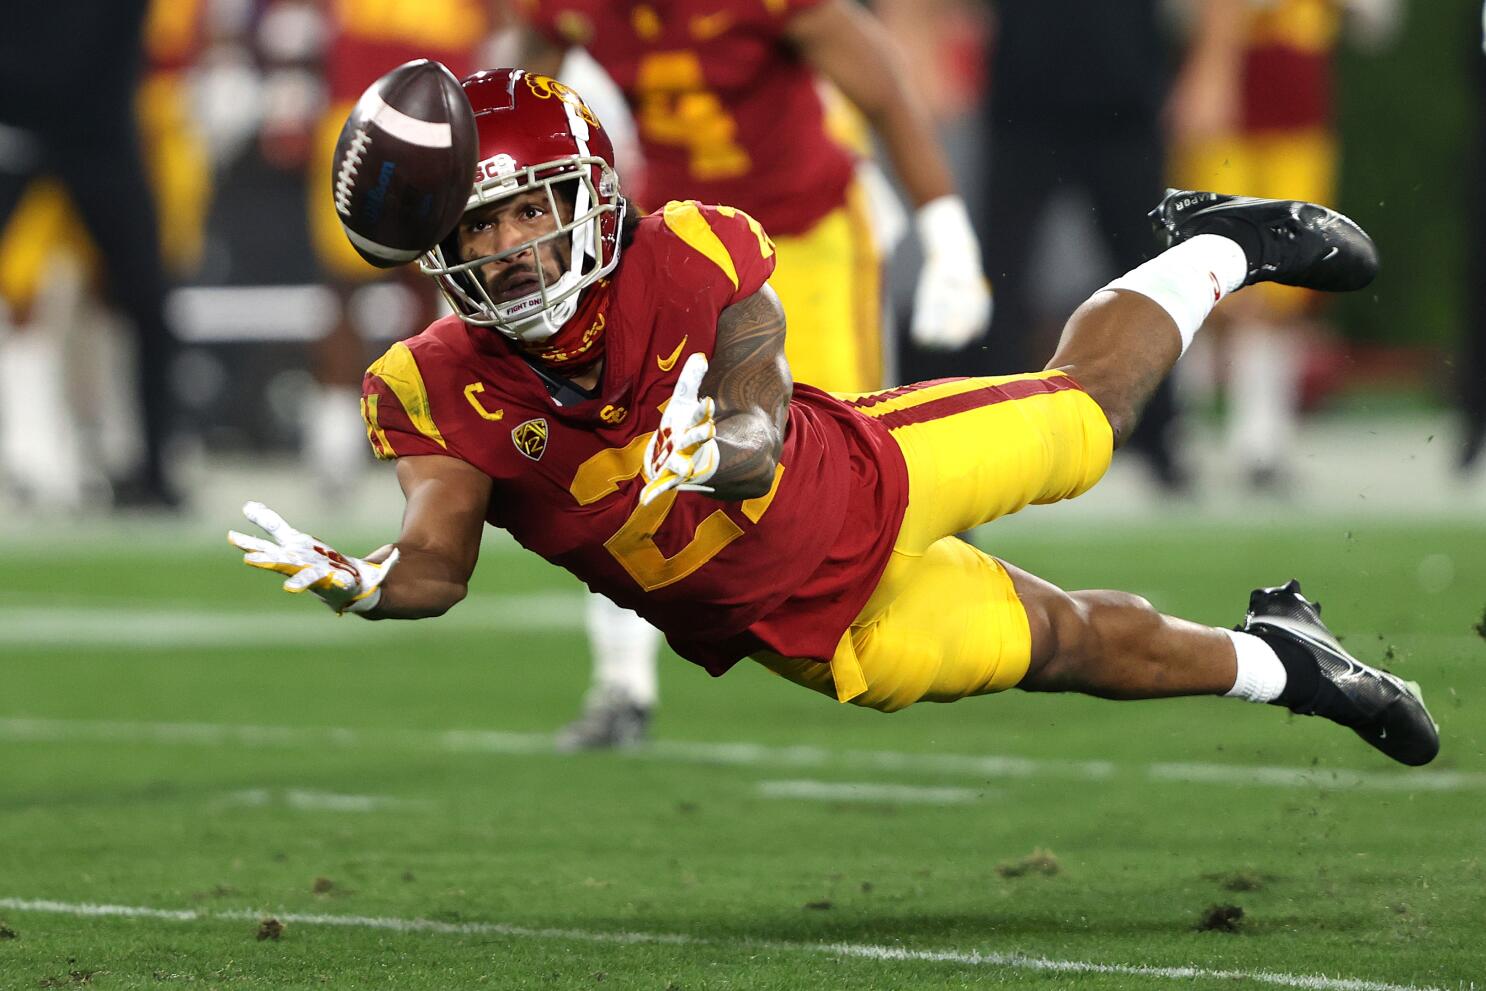 Isaiah Pola-Mao temporarily moves to nickel corner for USC - Los